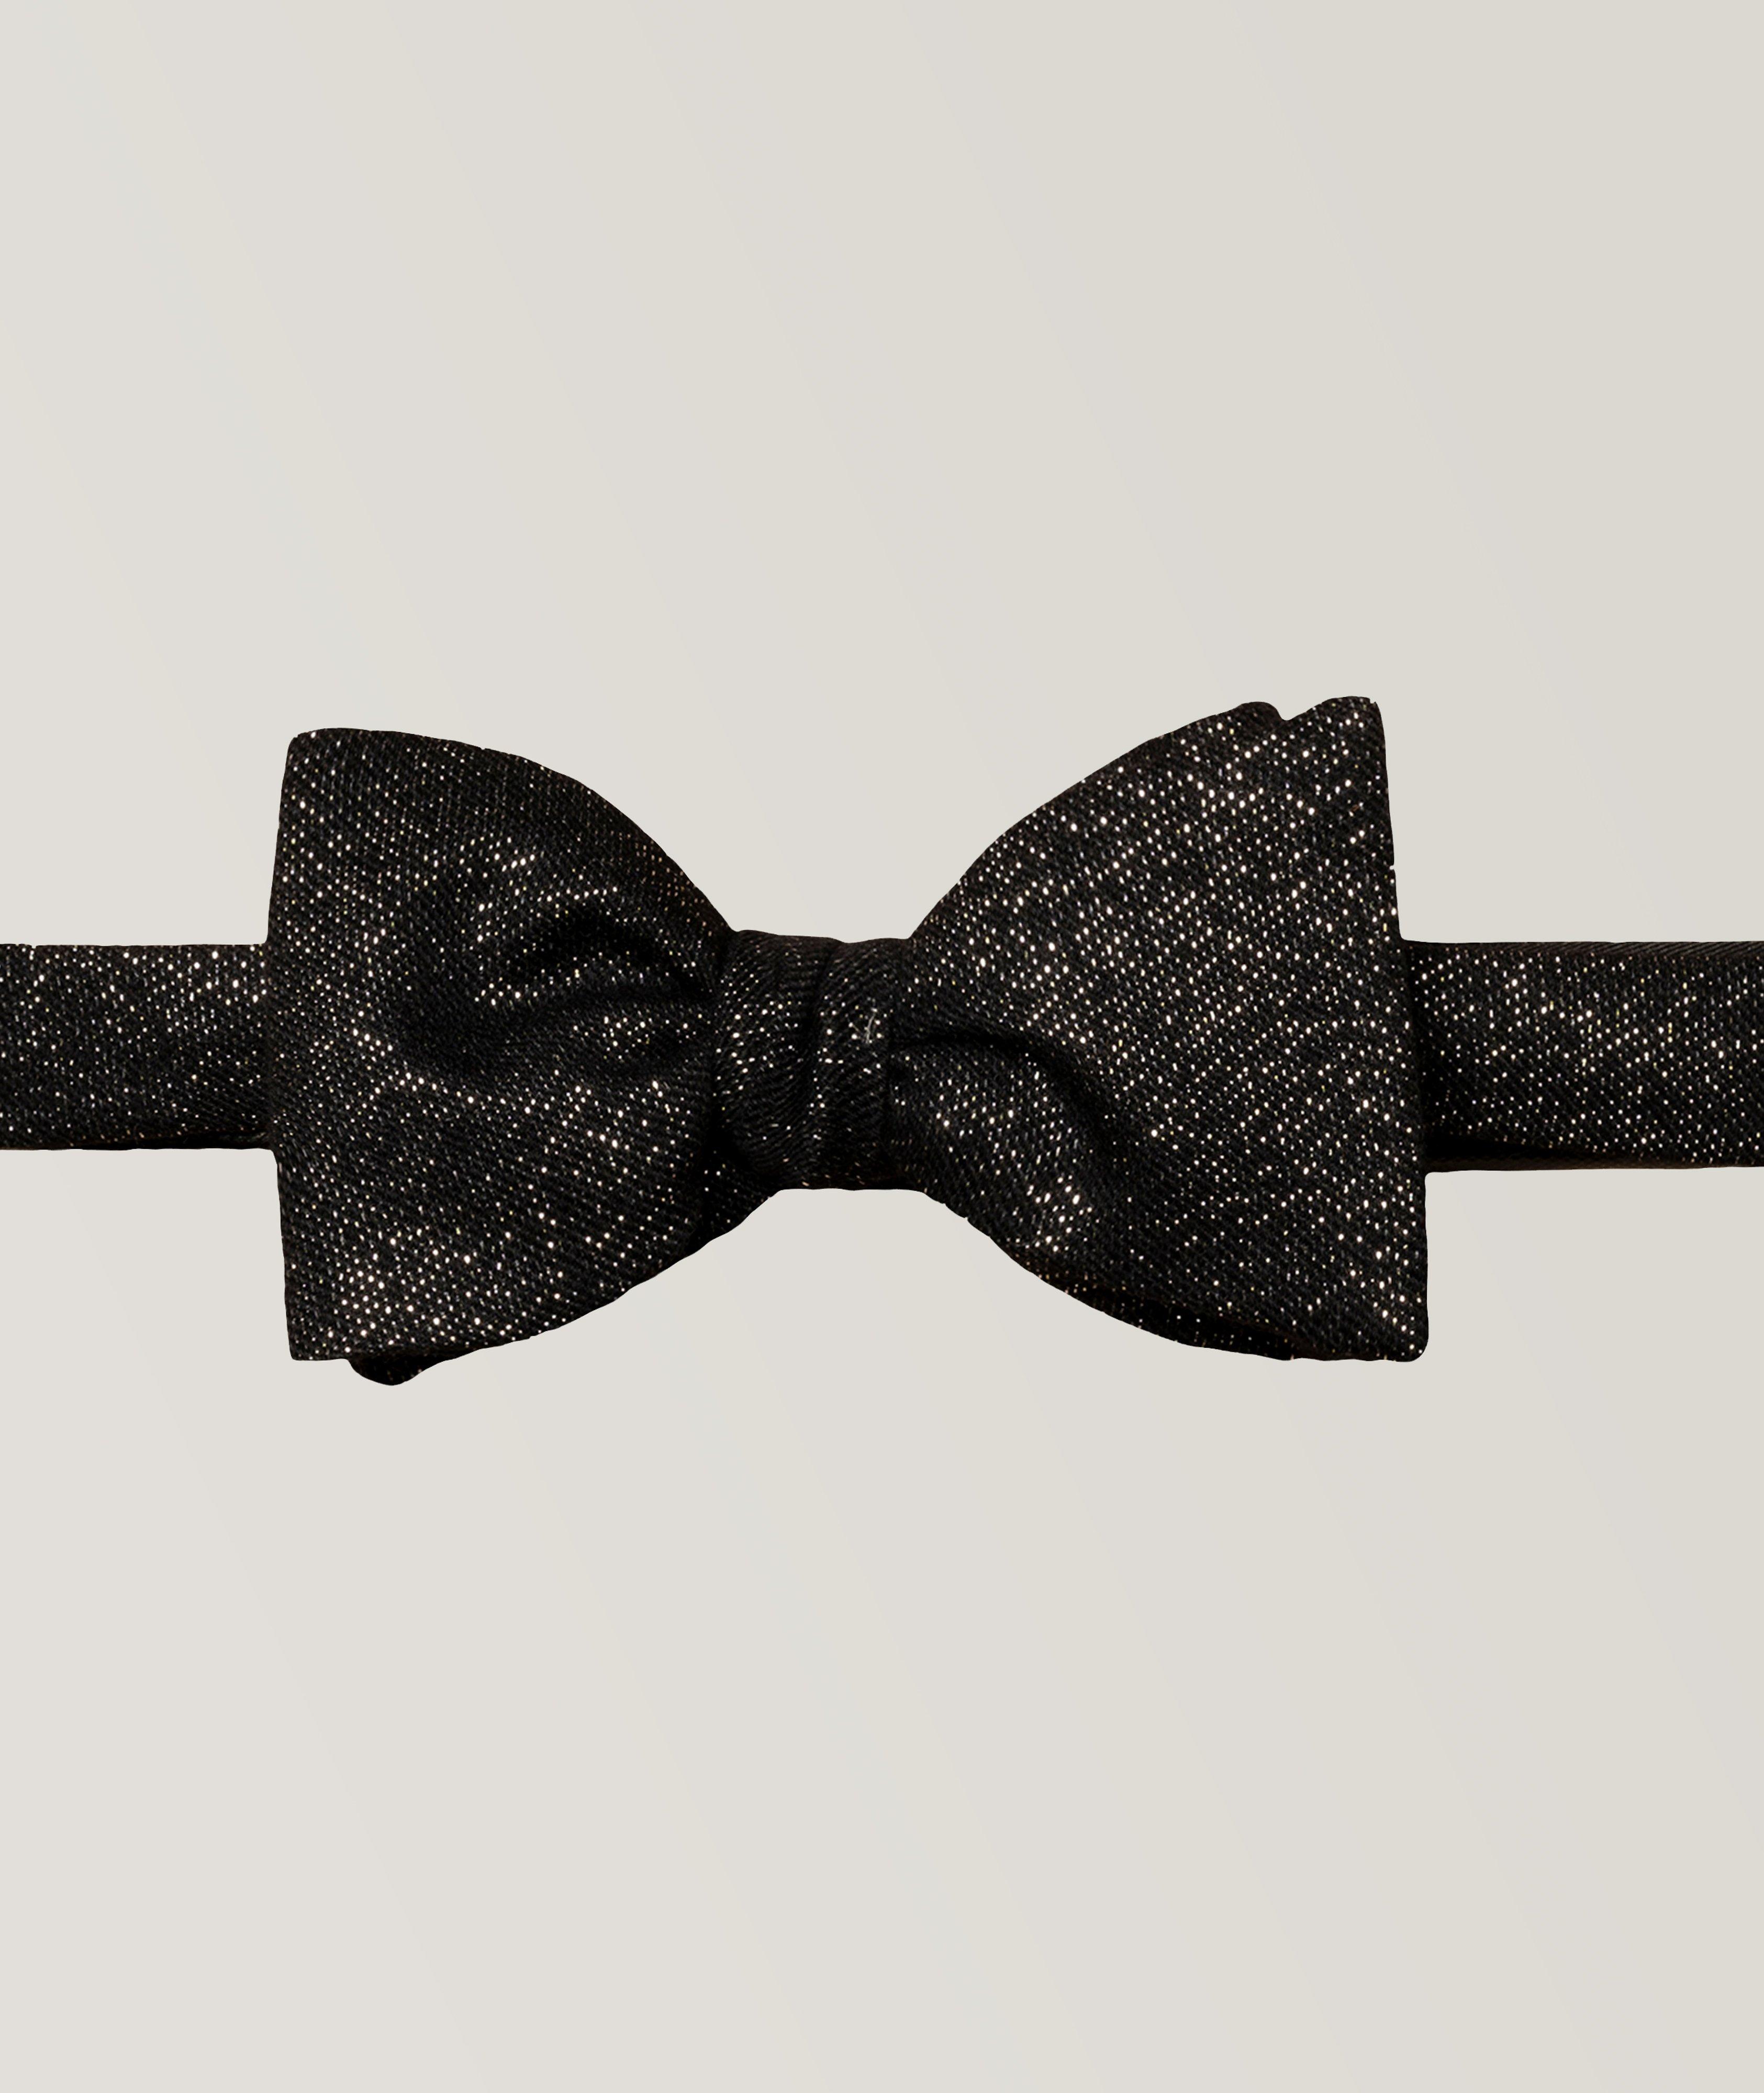 Shimmering Silk Bow Tie image 0